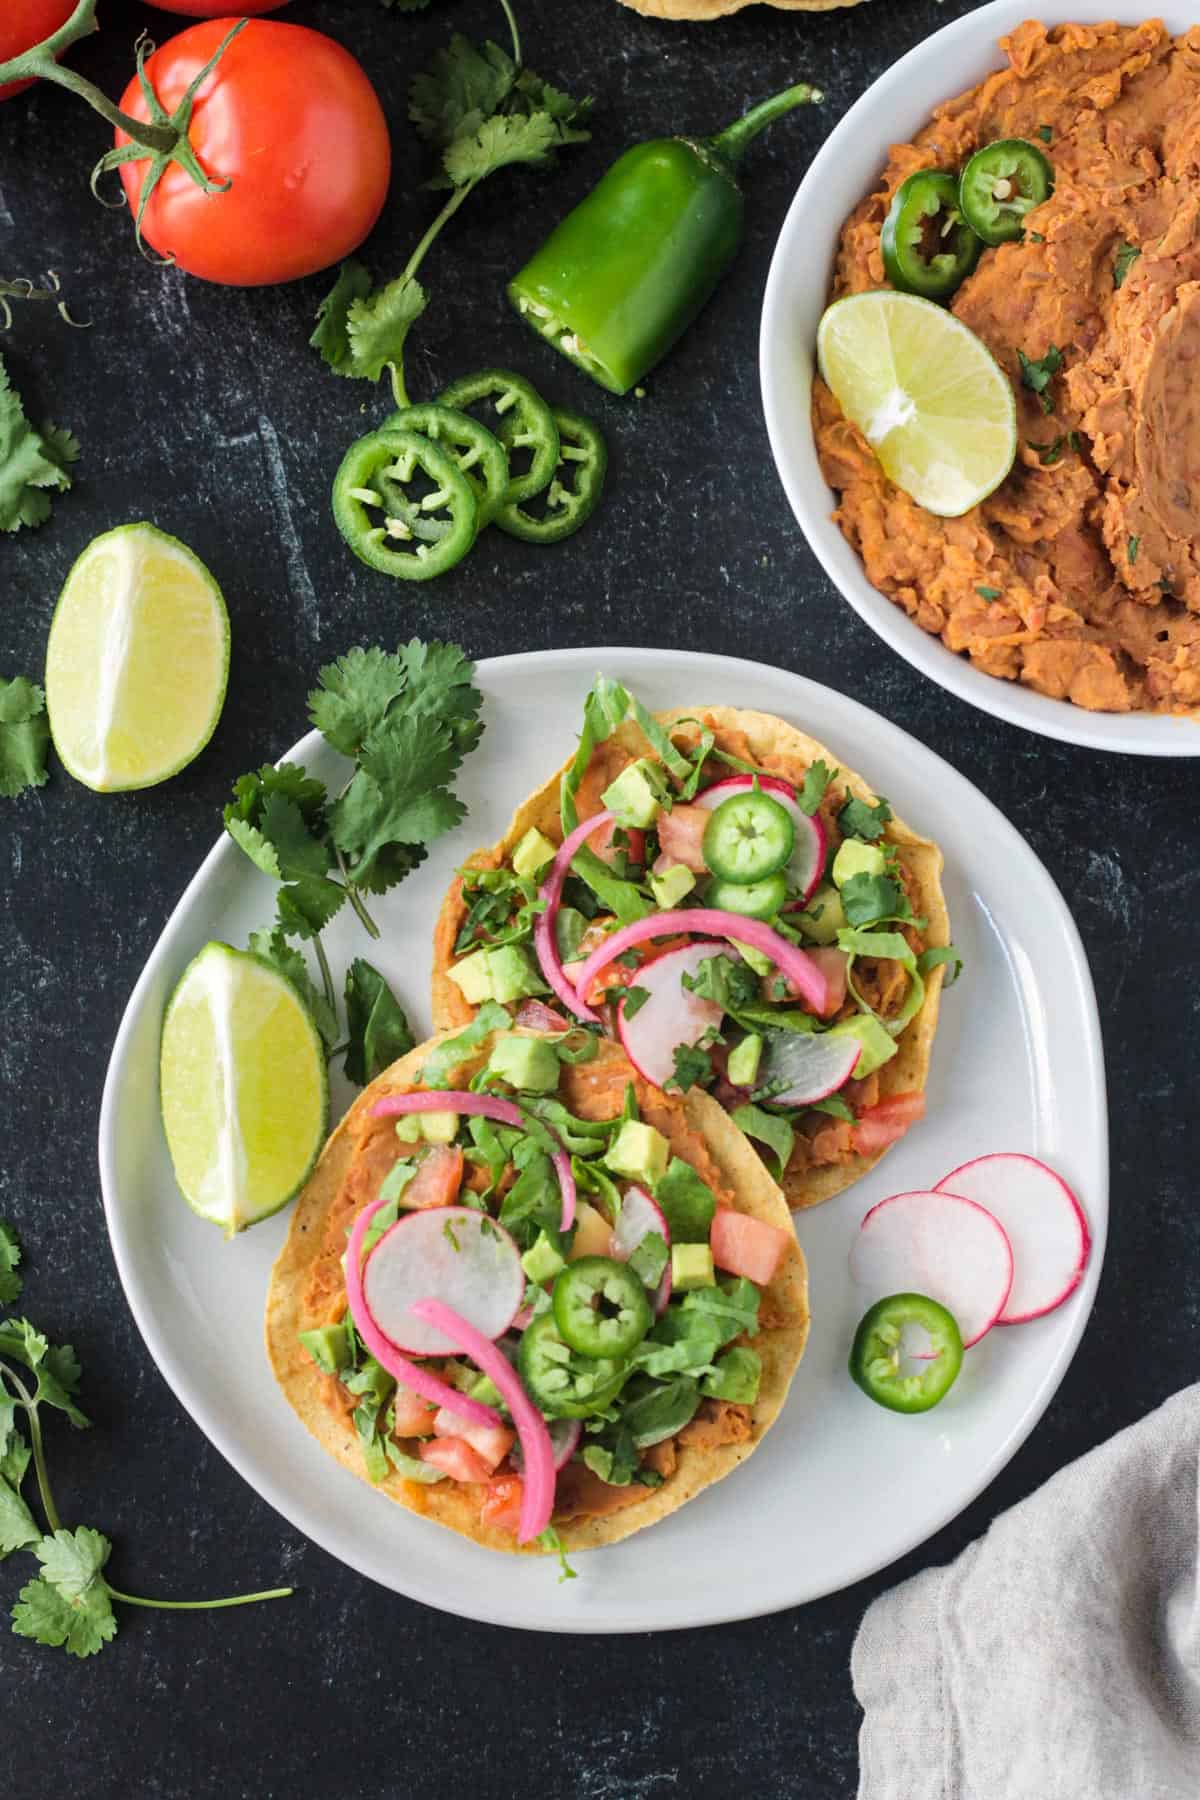 Vegan tostadas with refried beans and lots of toppings on a plate.